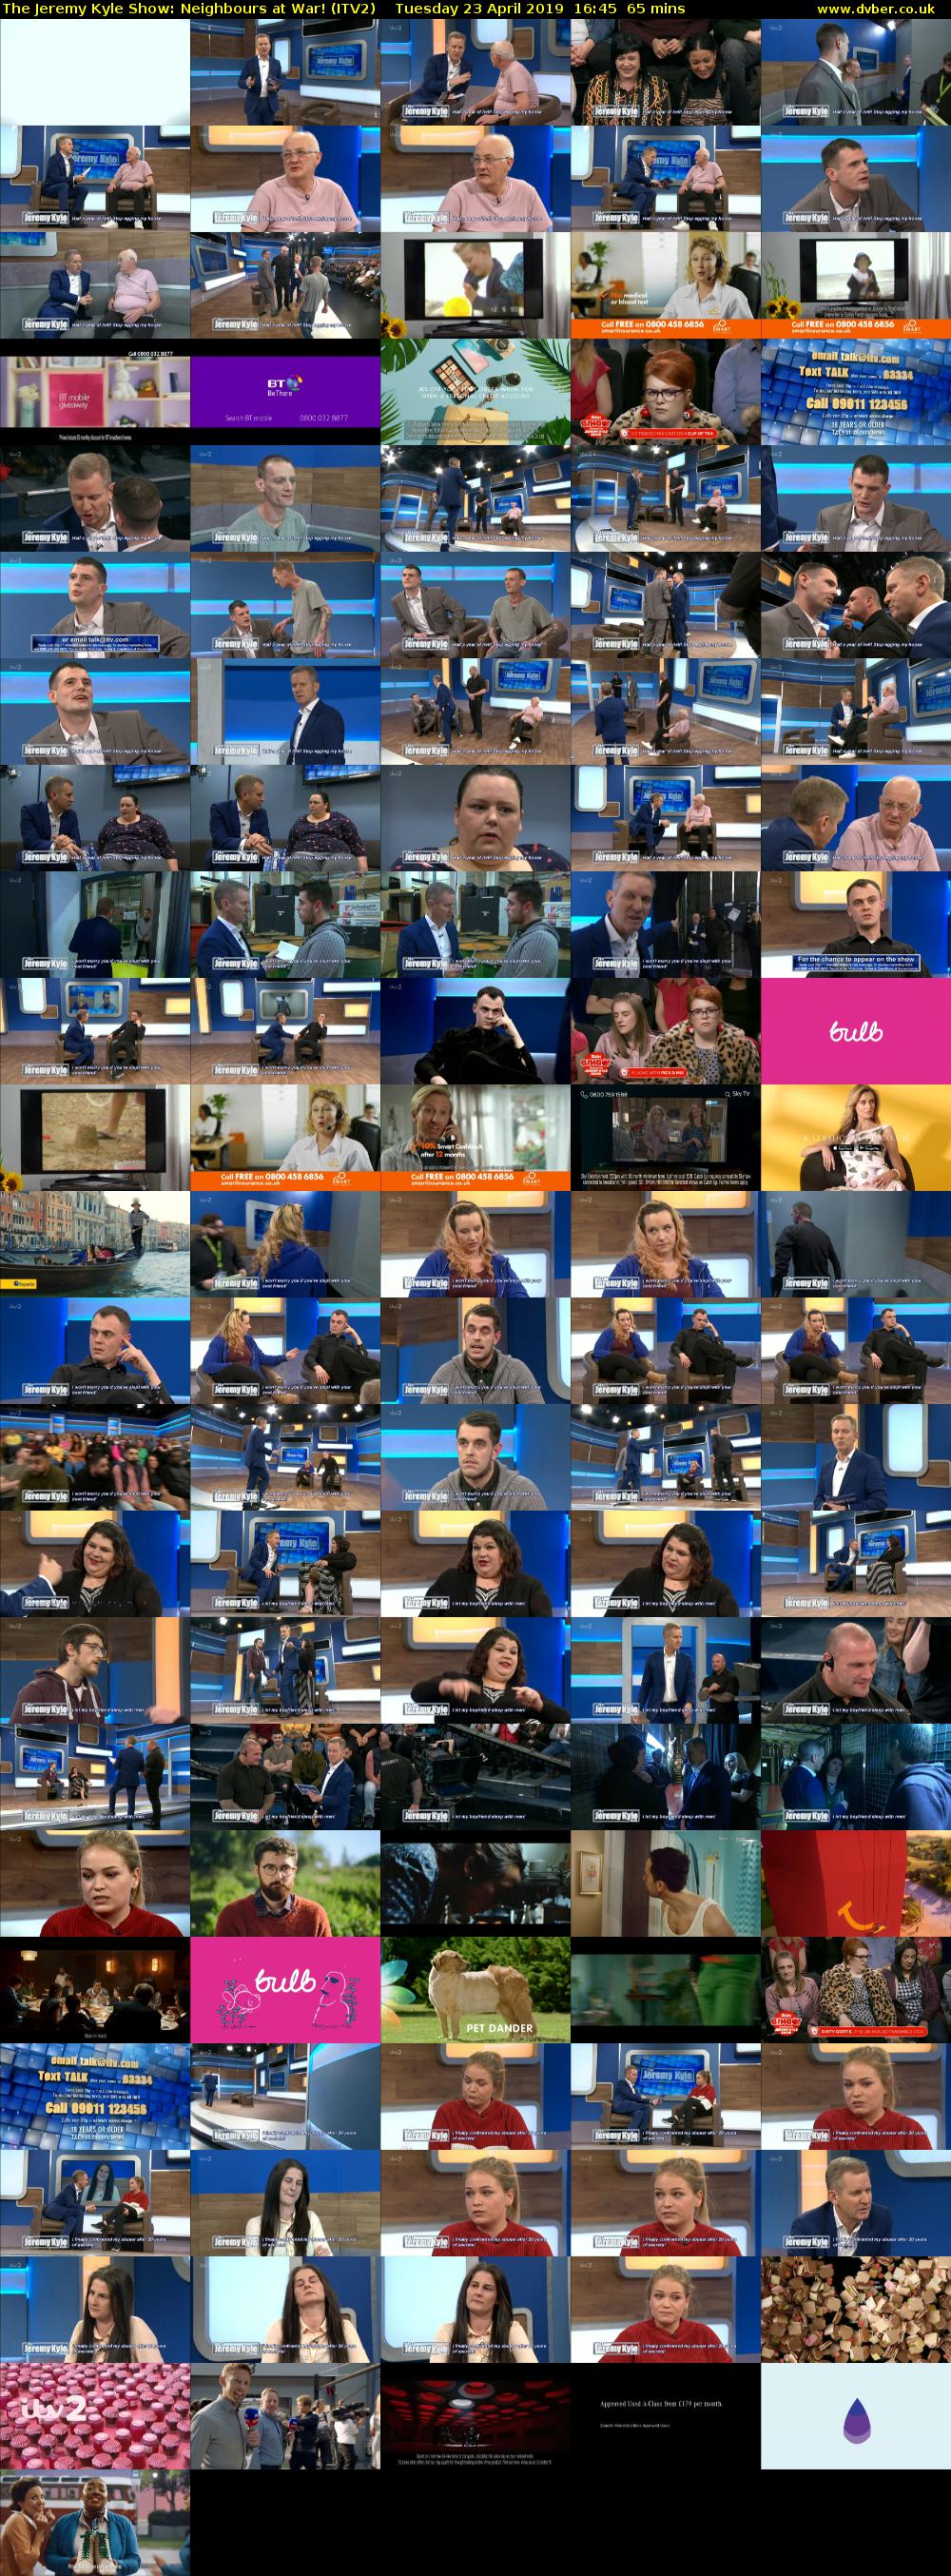 The Jeremy Kyle Show: Neighbours at War! (ITV2) Tuesday 23 April 2019 16:45 - 17:50